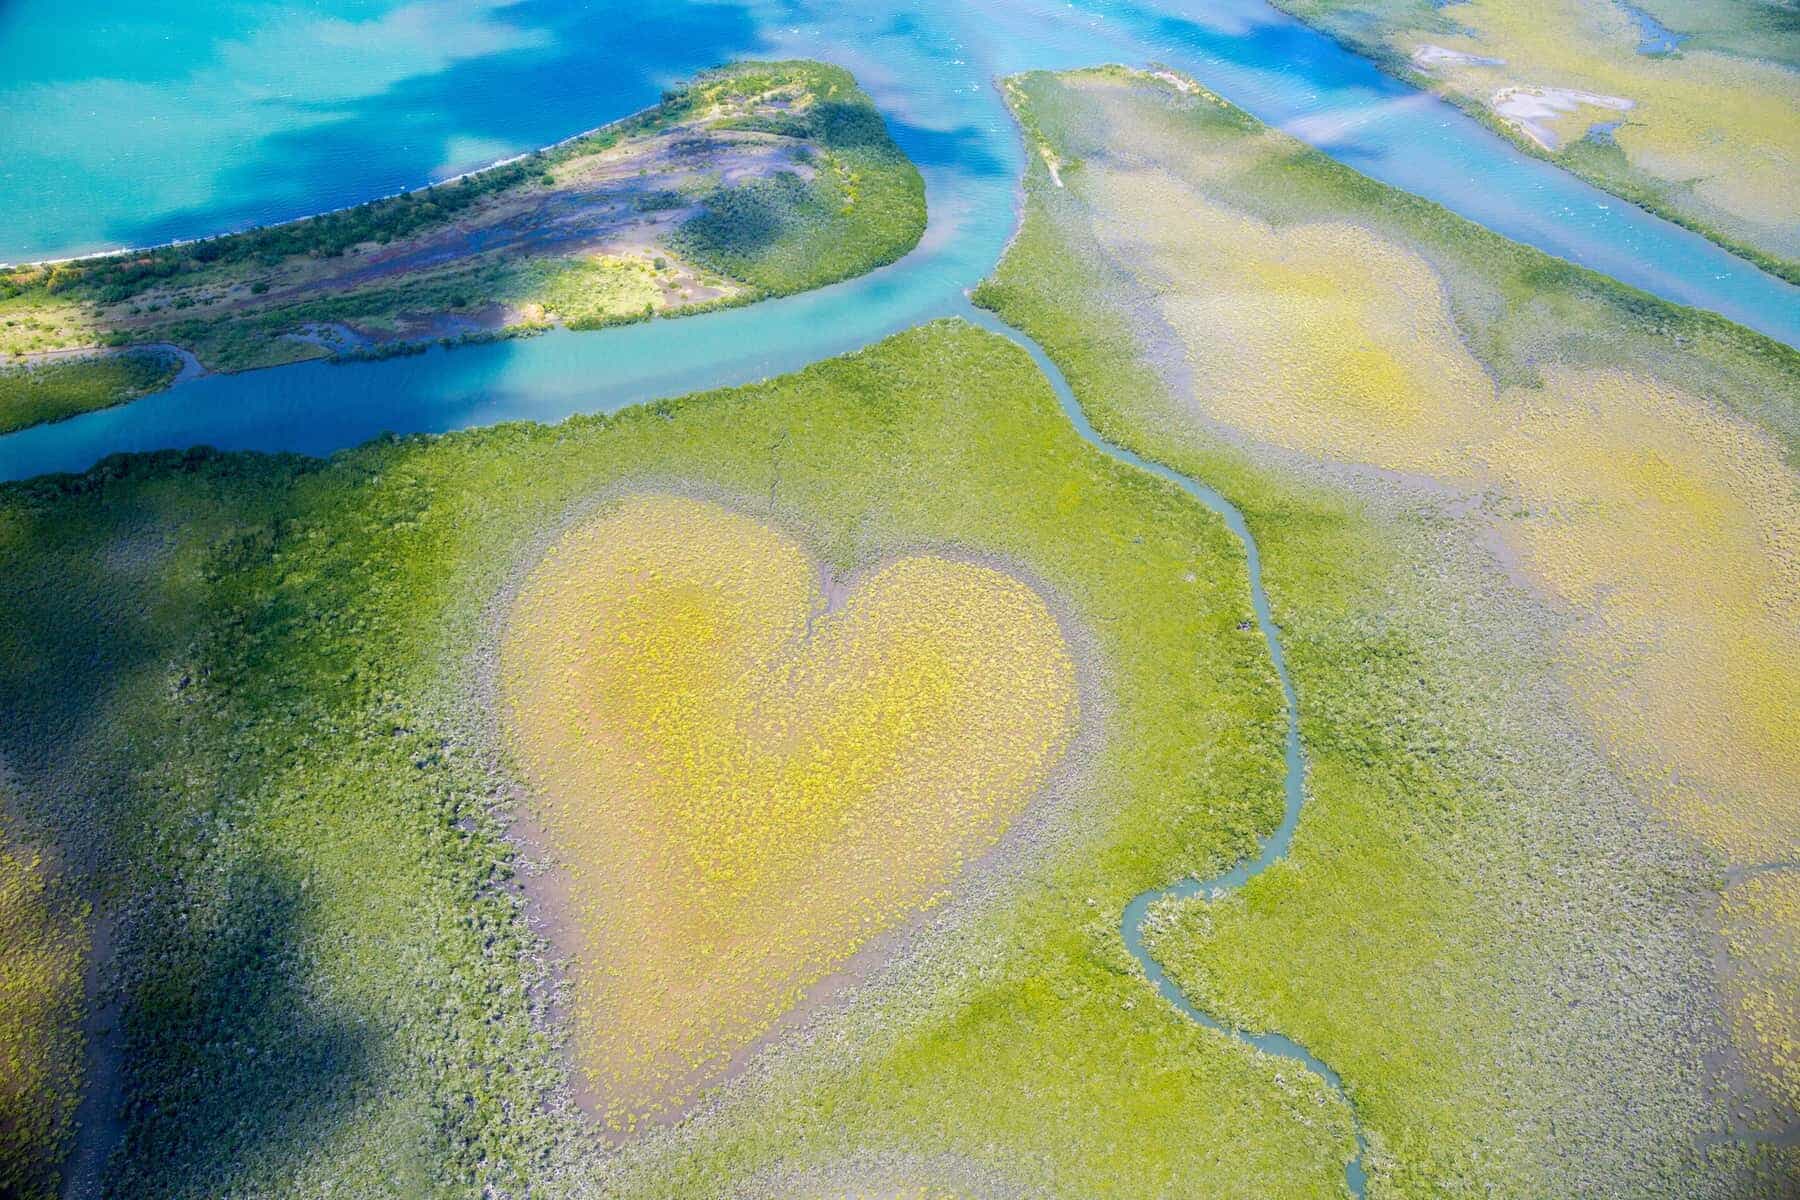 Heart of Voh, aerial view, mangroves resemble a heart seen from above, New Caledonia, Micronesia